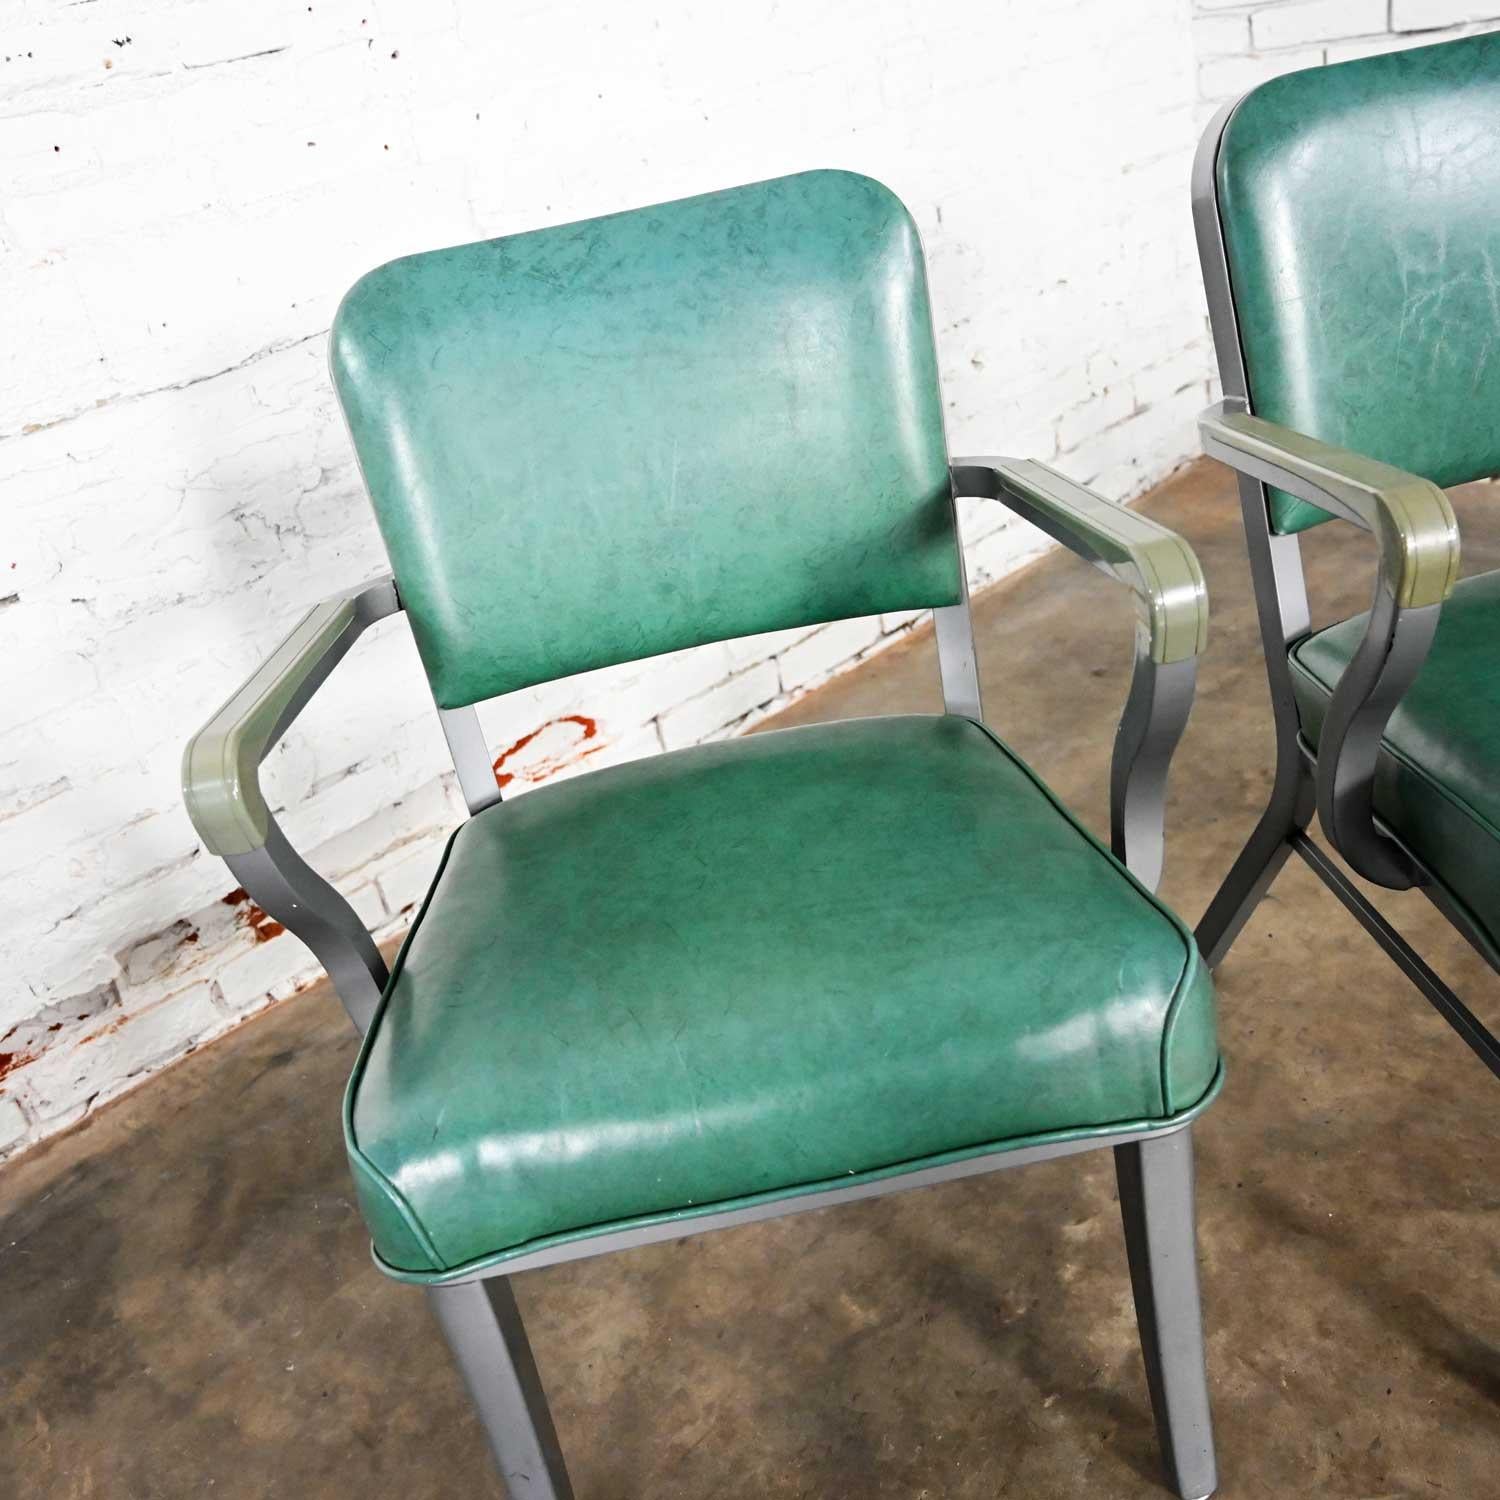 Streamline Industrial Metal & Green Vinyl Faux Leather Dining Chairs Set of 6 2